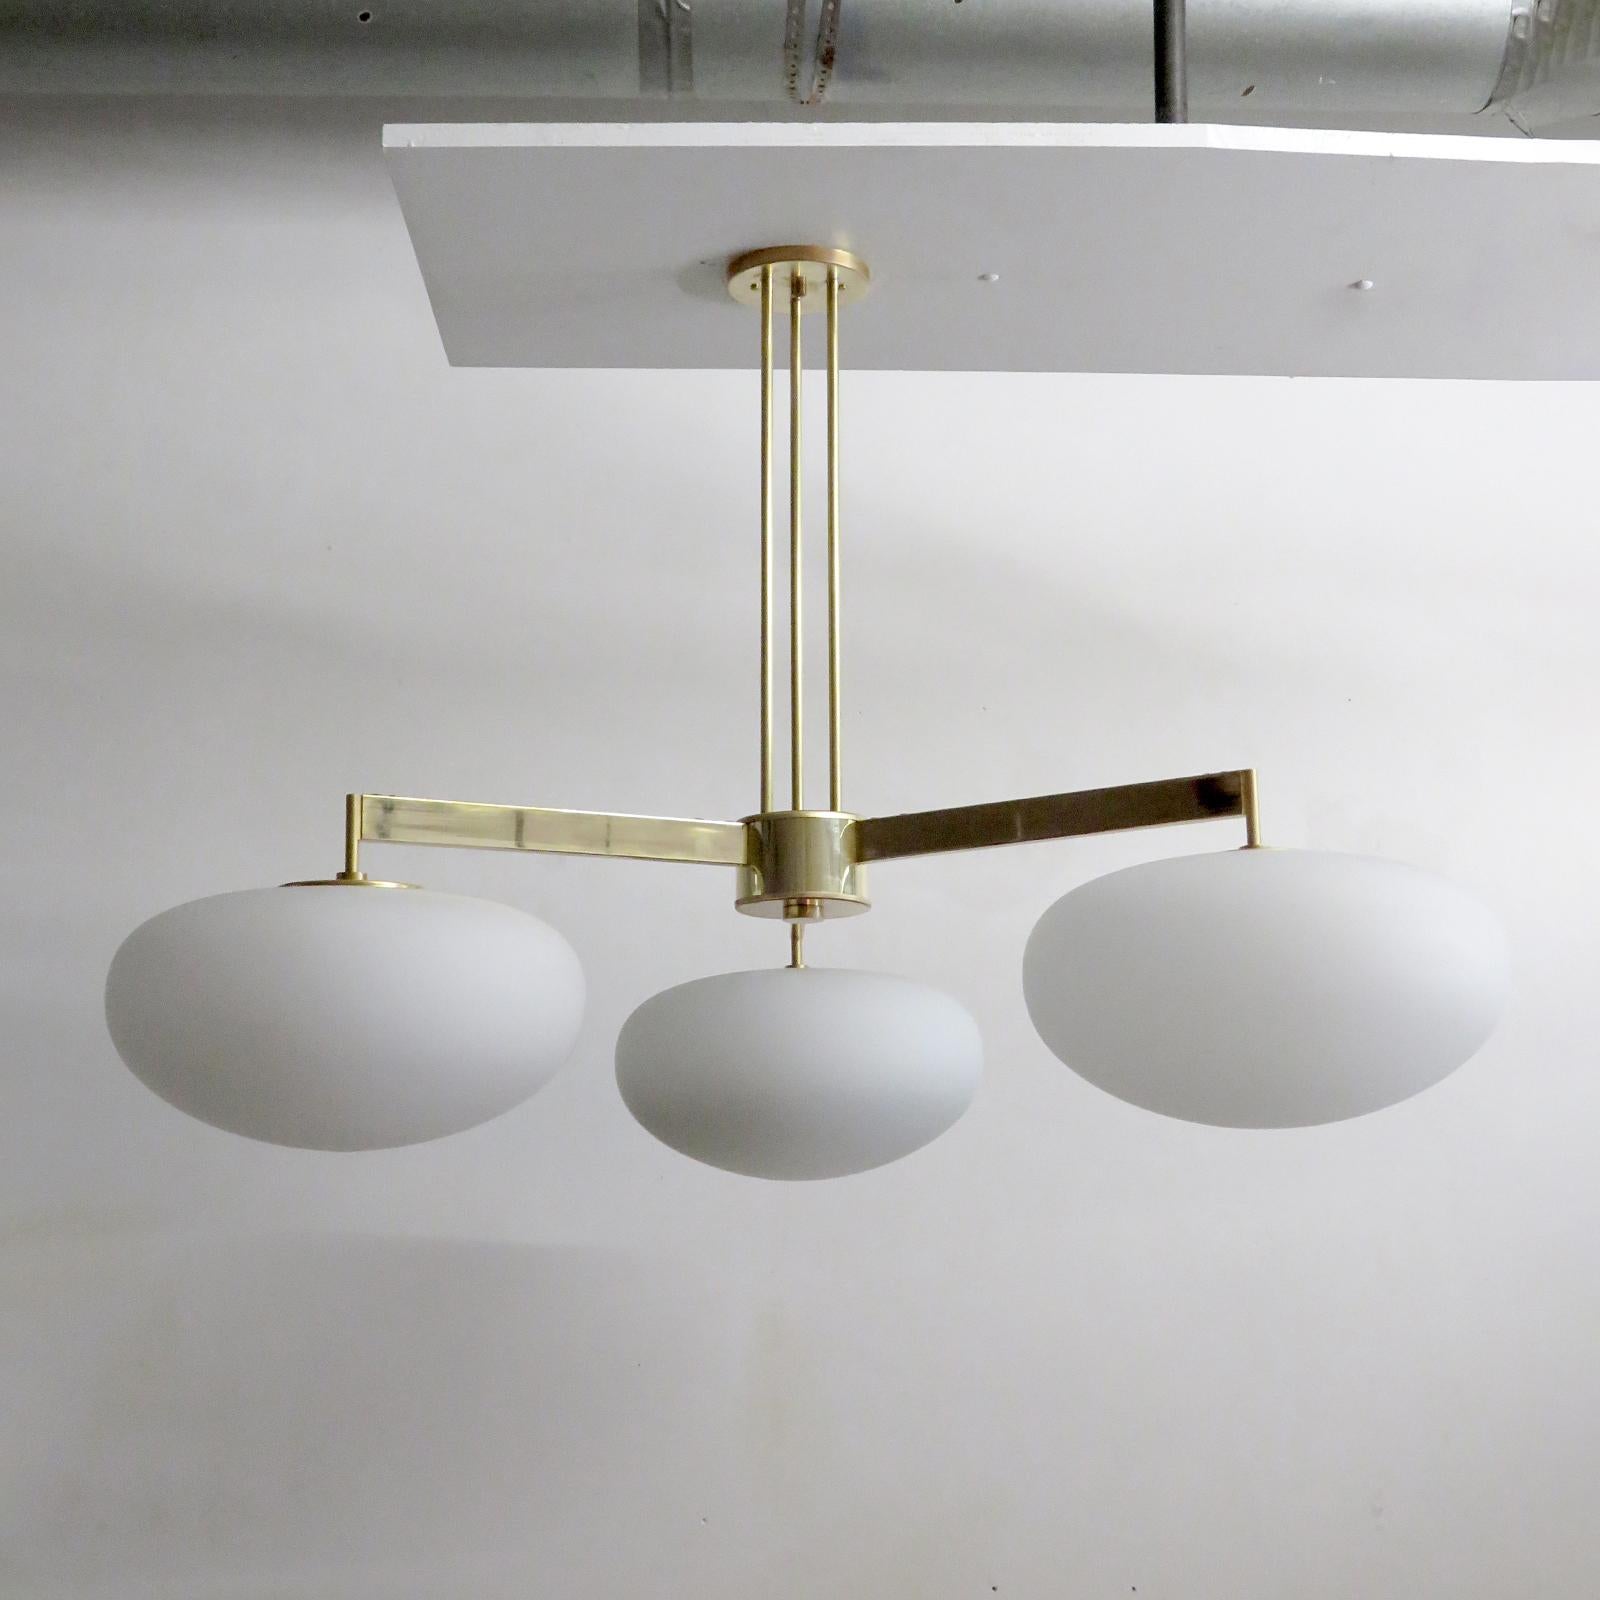 stunning large-scale three-arm flush mount fixture by Gallery L7, handcrafted and finished in Los Angeles from American brass with polished brass finish and three matte opaline glass globes, measures 40 x 30 inch, three E26 sockets per fixture, max.